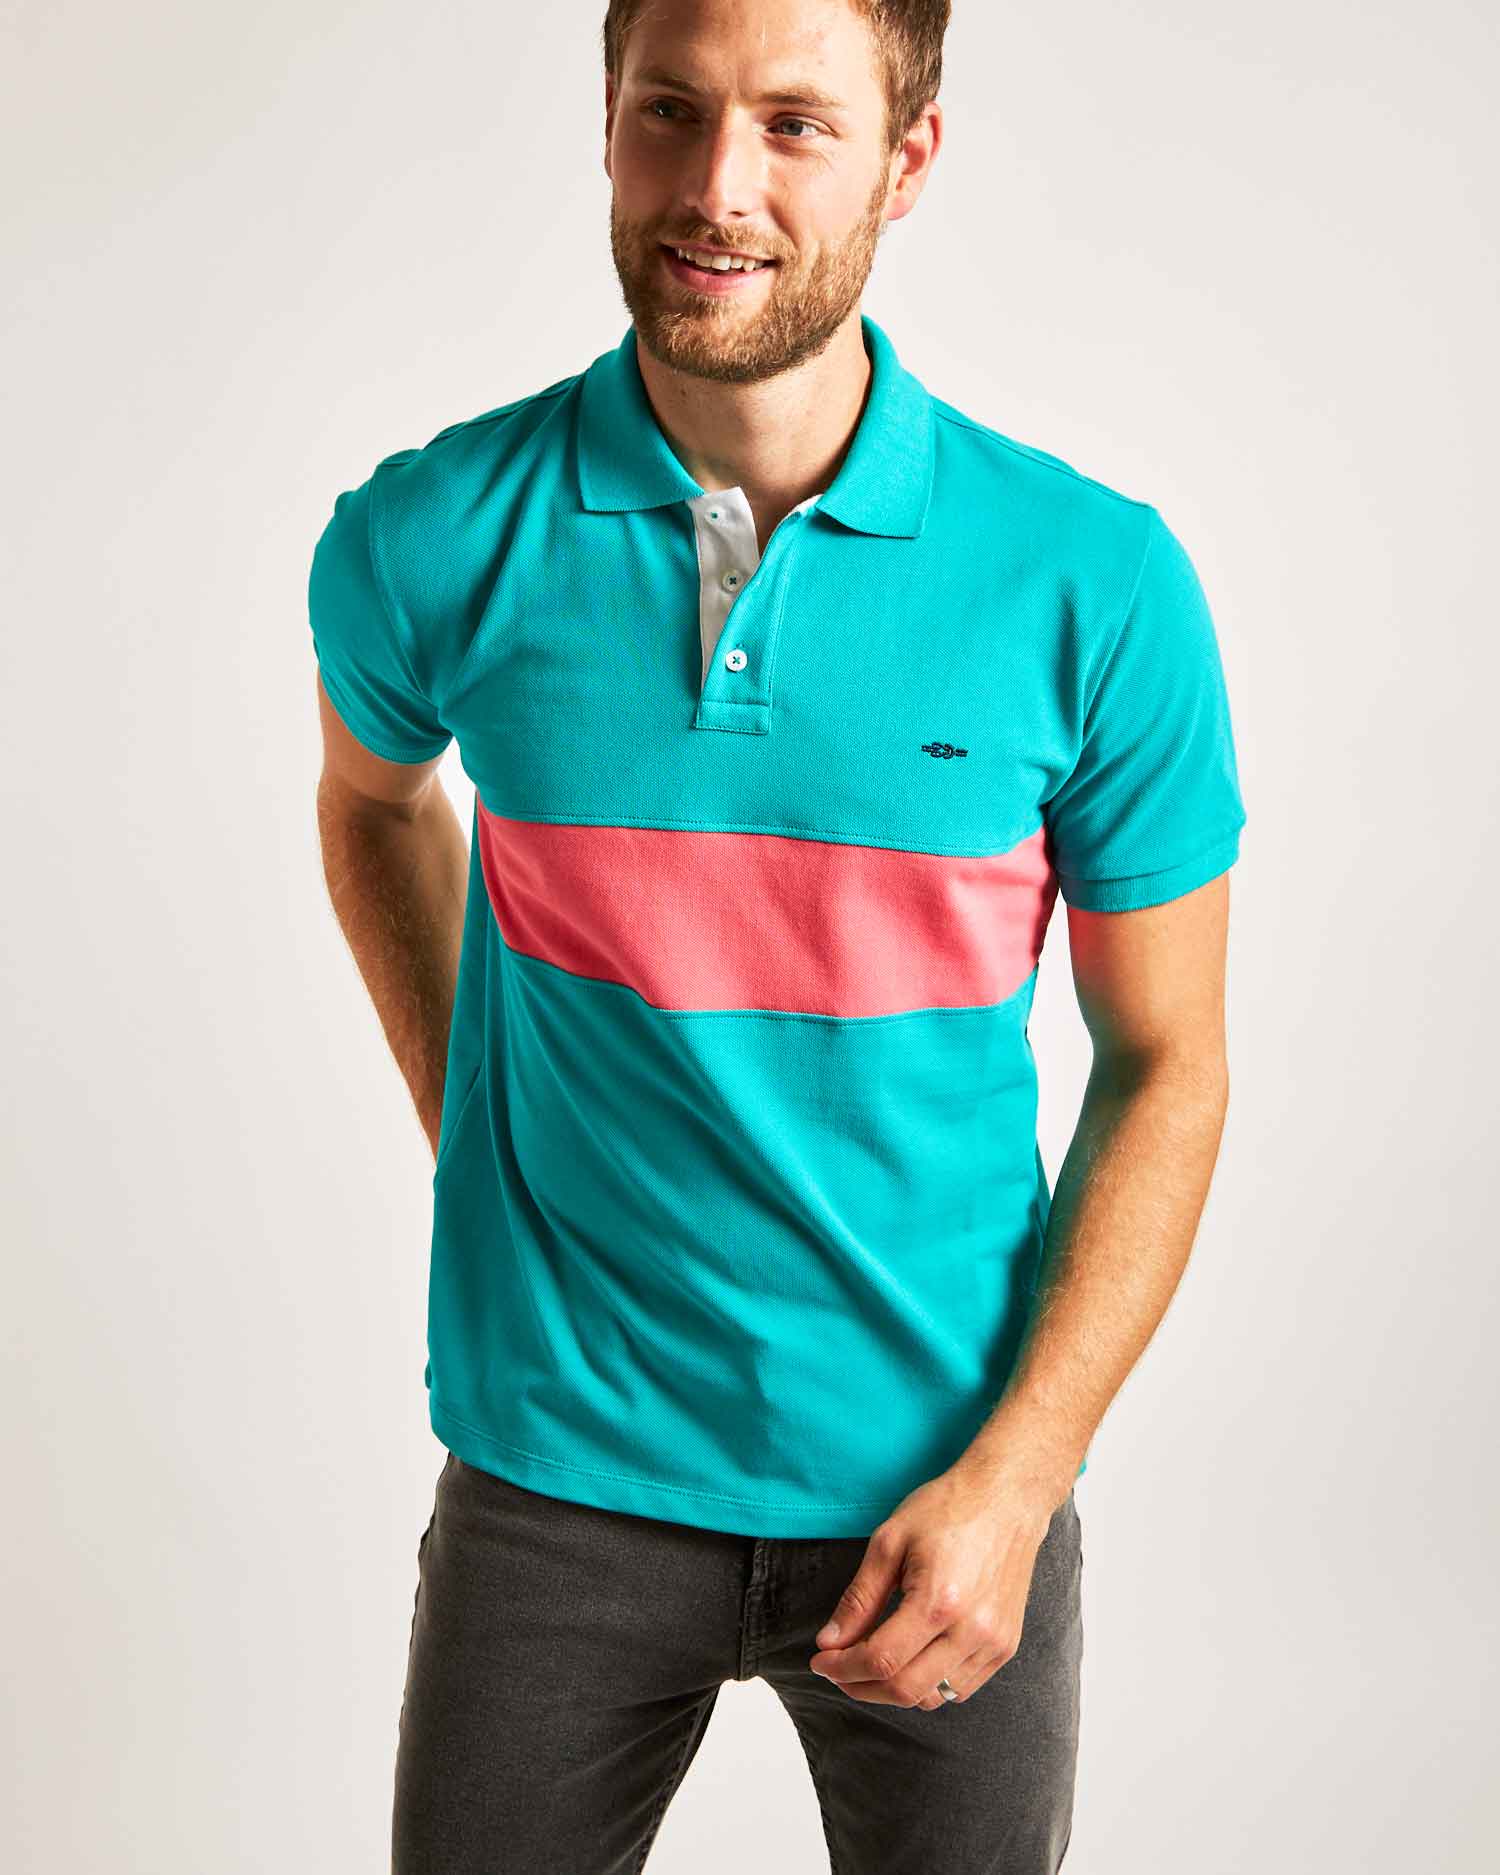 Teal Striped Polo Shirt (White Contrast) – Reef Knots